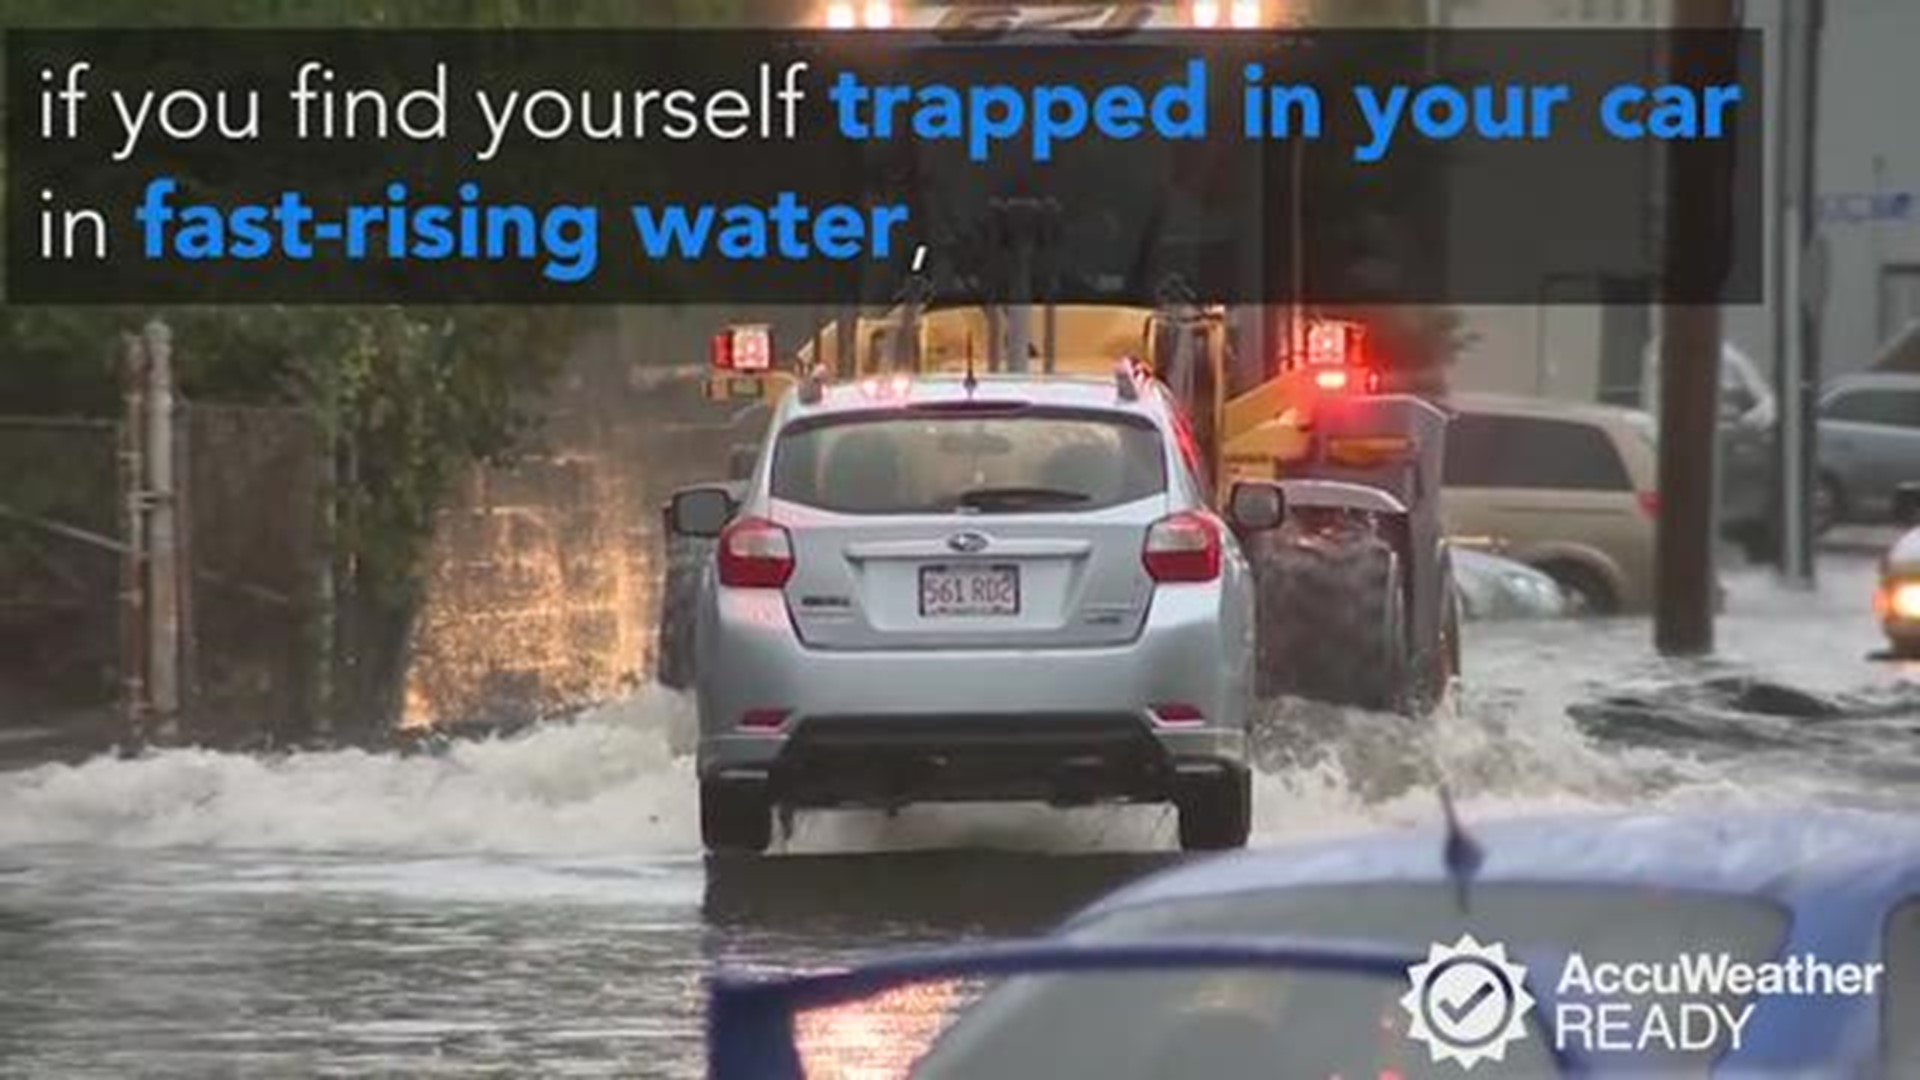 There are more deaths due to flooding than from any other thunderstorm-related hazard and most occur when a vehicle is driven into hazardous floodwaters. These drownings are preventable with proper safety precautions.